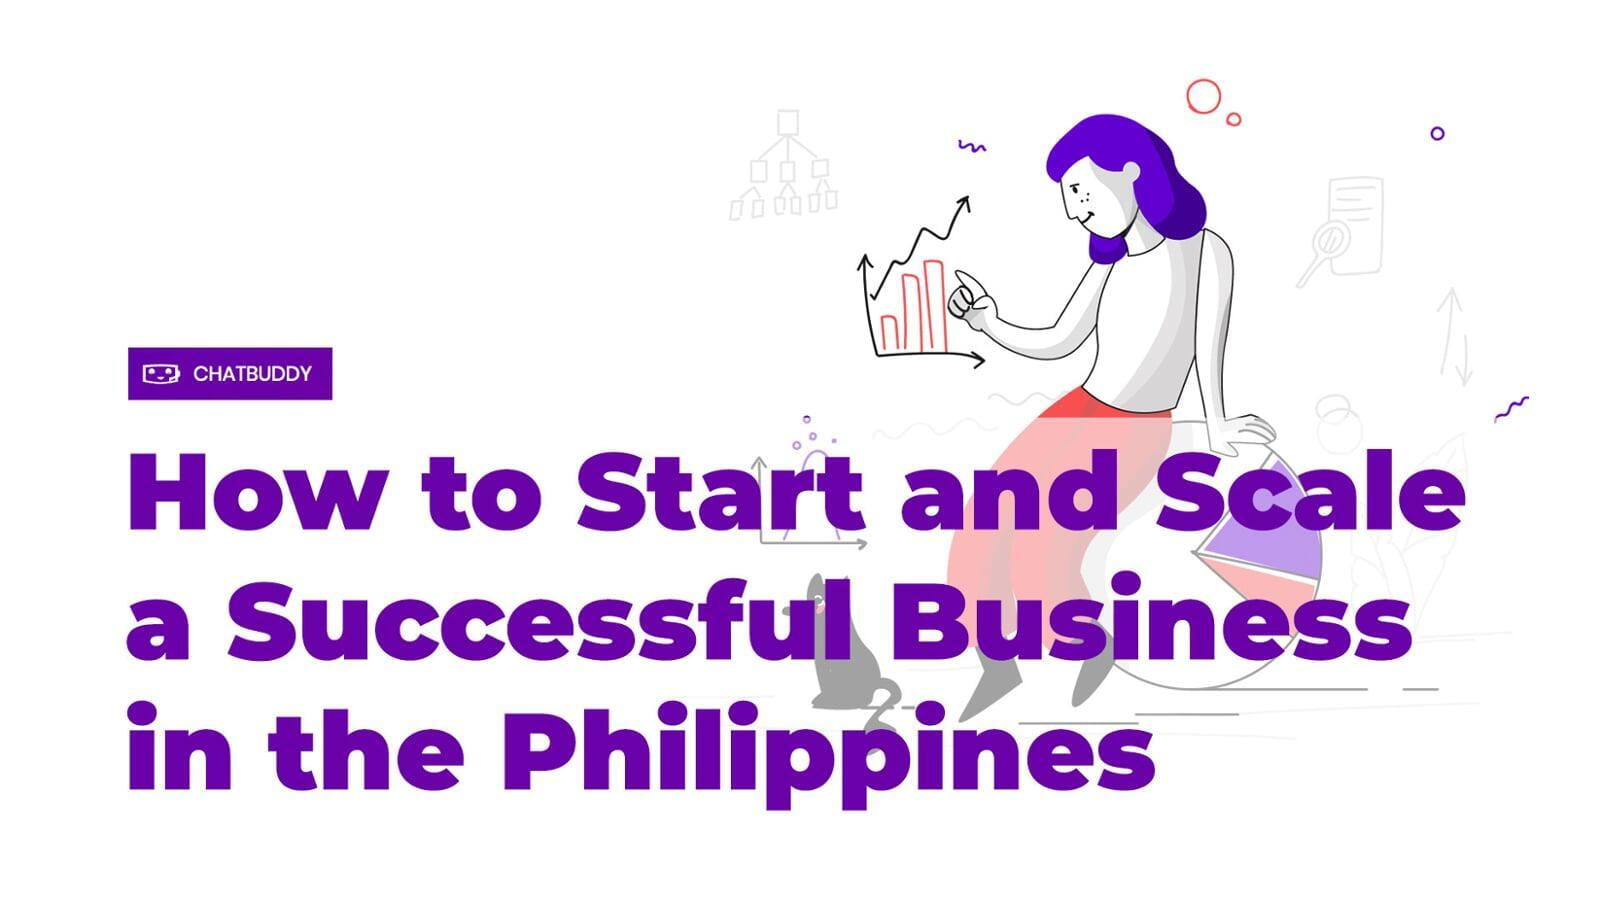 How to Start and Scale a Successful Business in the Philippines